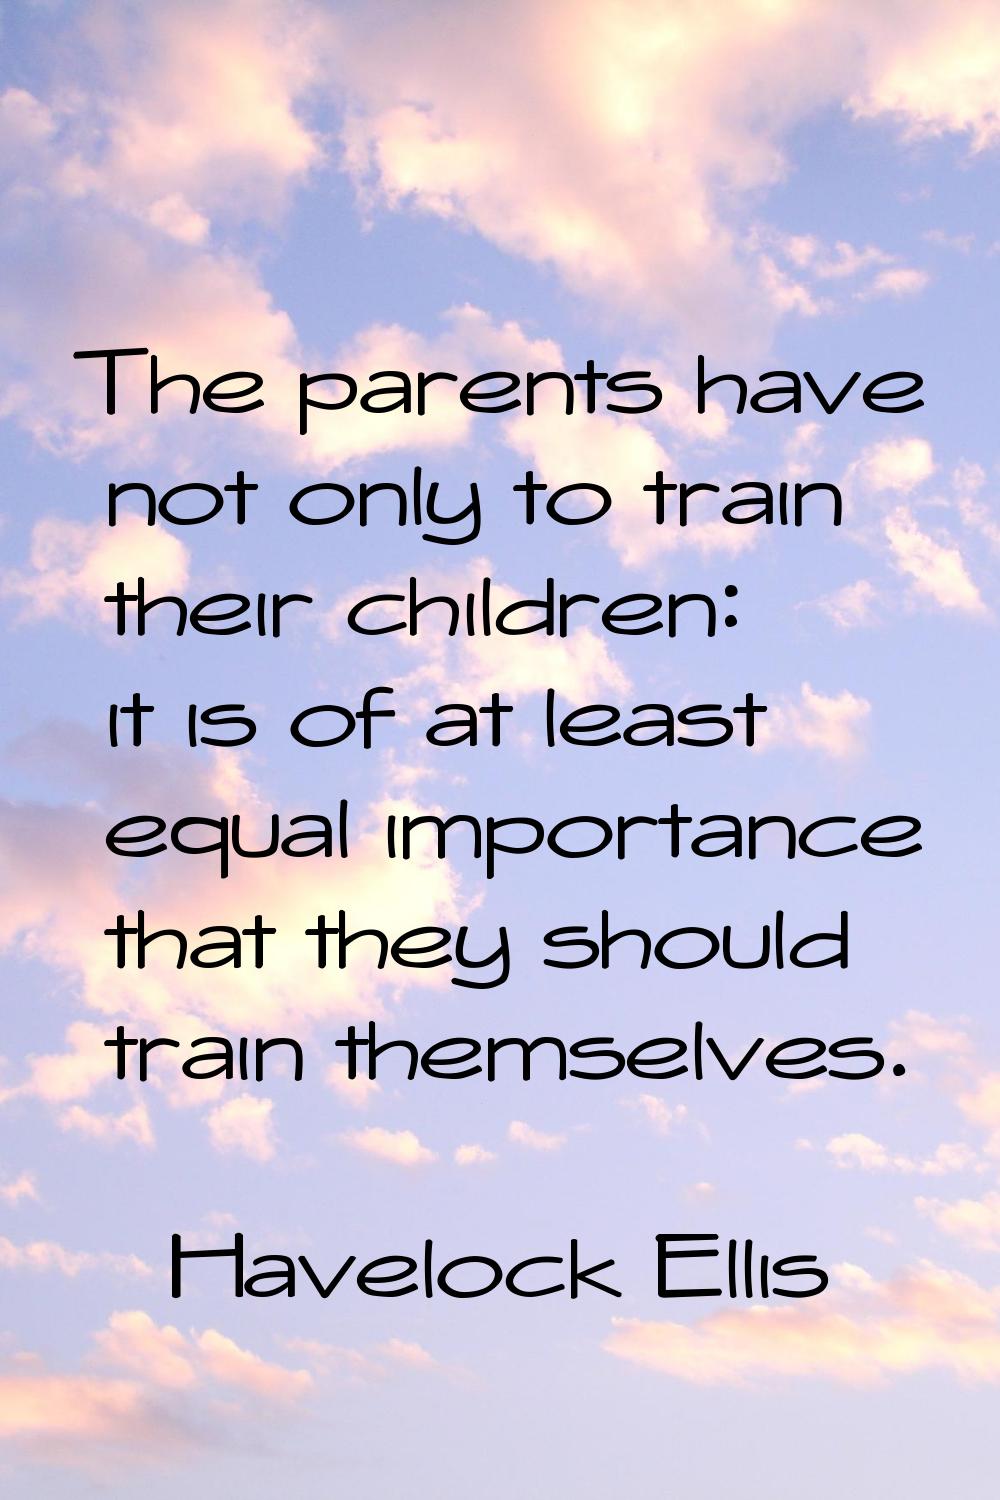 The parents have not only to train their children: it is of at least equal importance that they sho